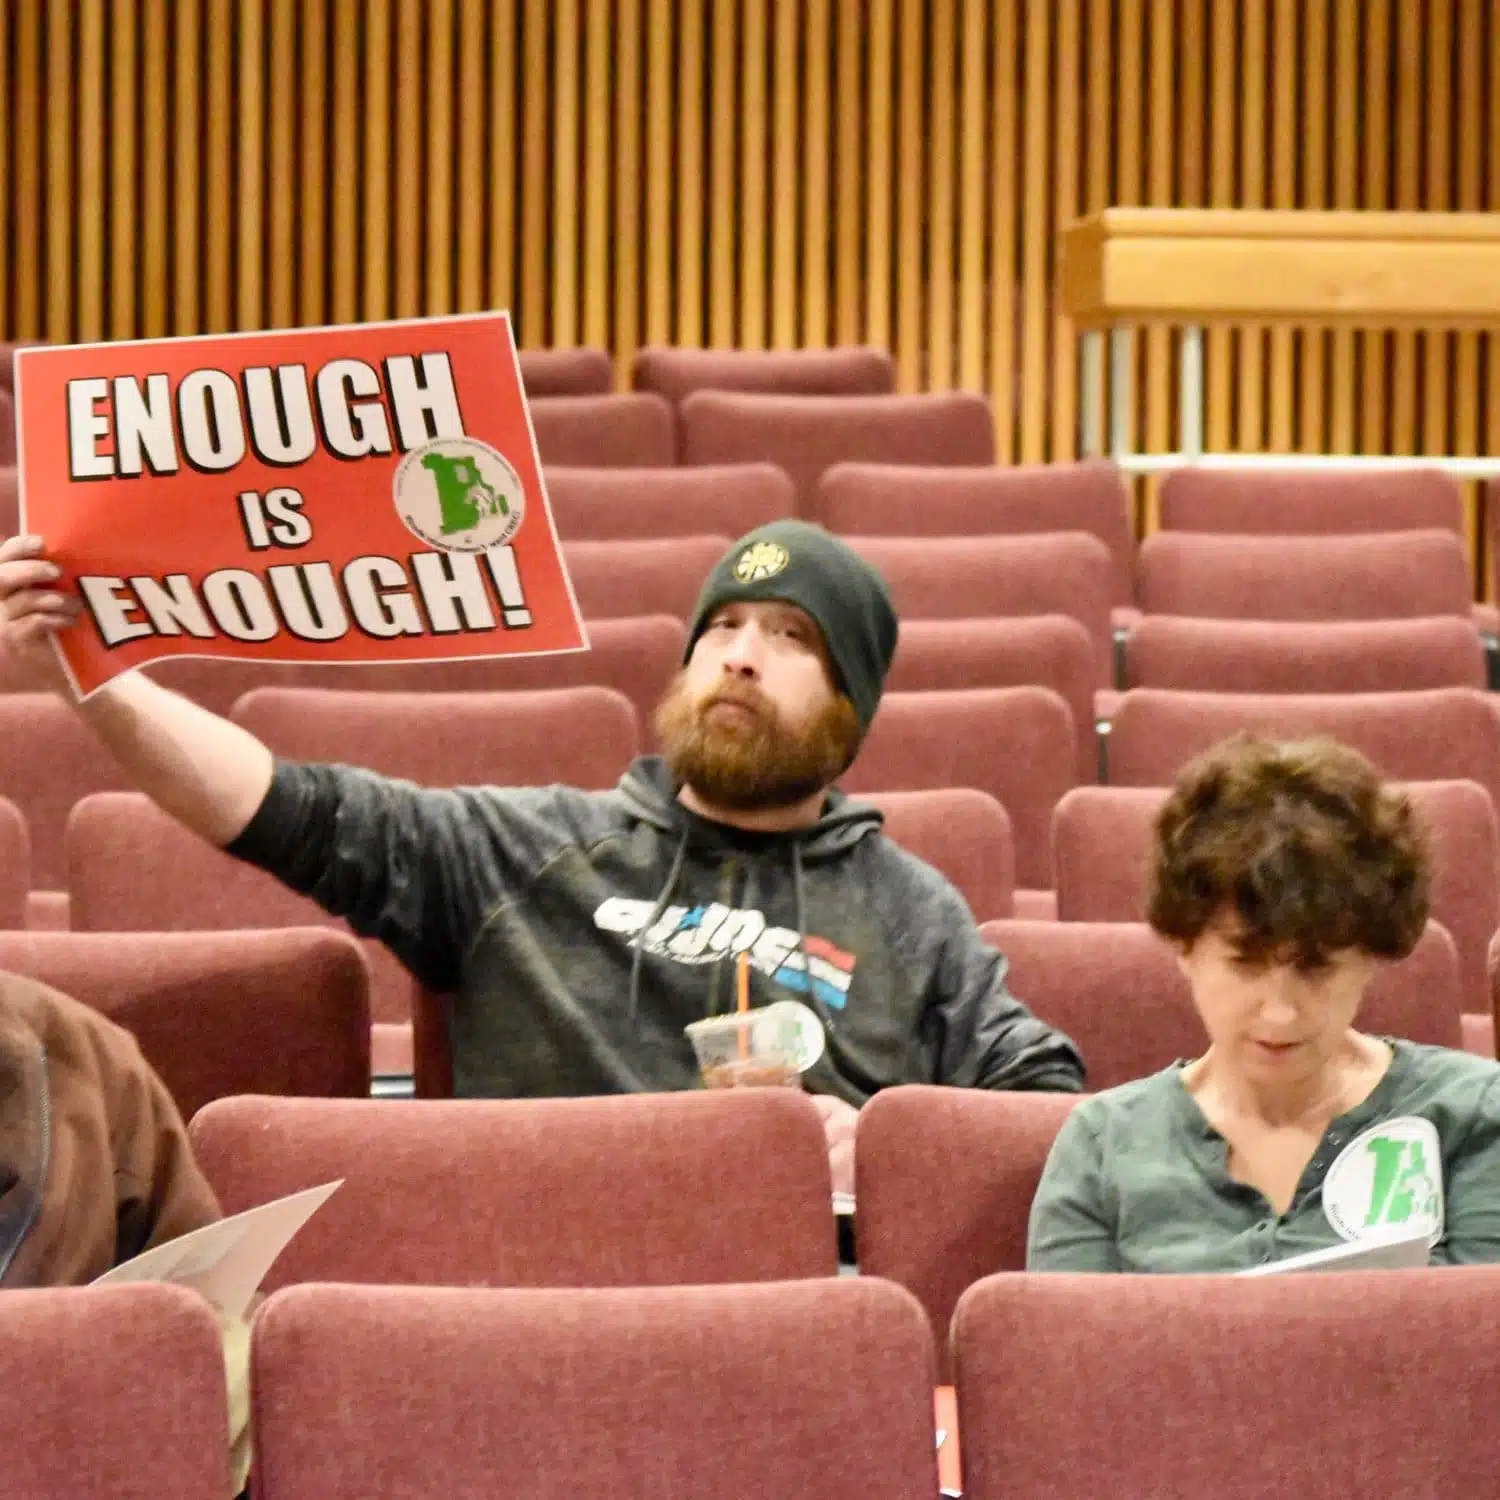 Invenergy: Delays in permitting power plant due to uninformed opposition, not our incompetence